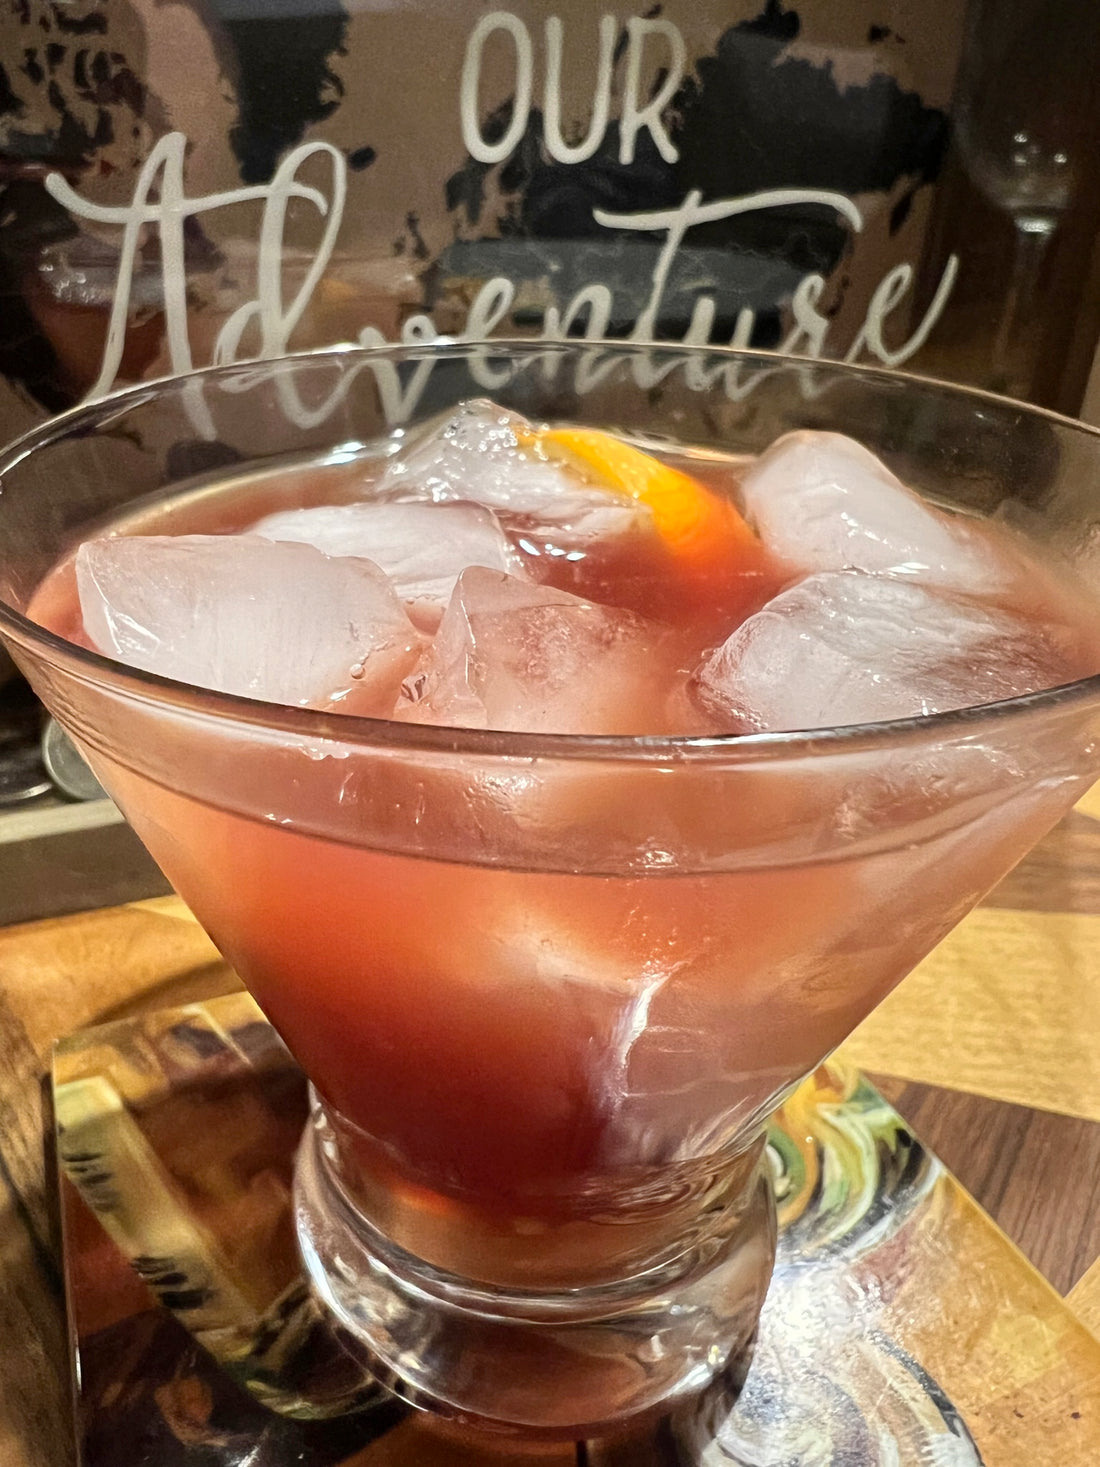 Wood's pink rum punch in a clear glass garnished with an orange slice with the words "Our Adventure" written in the background.